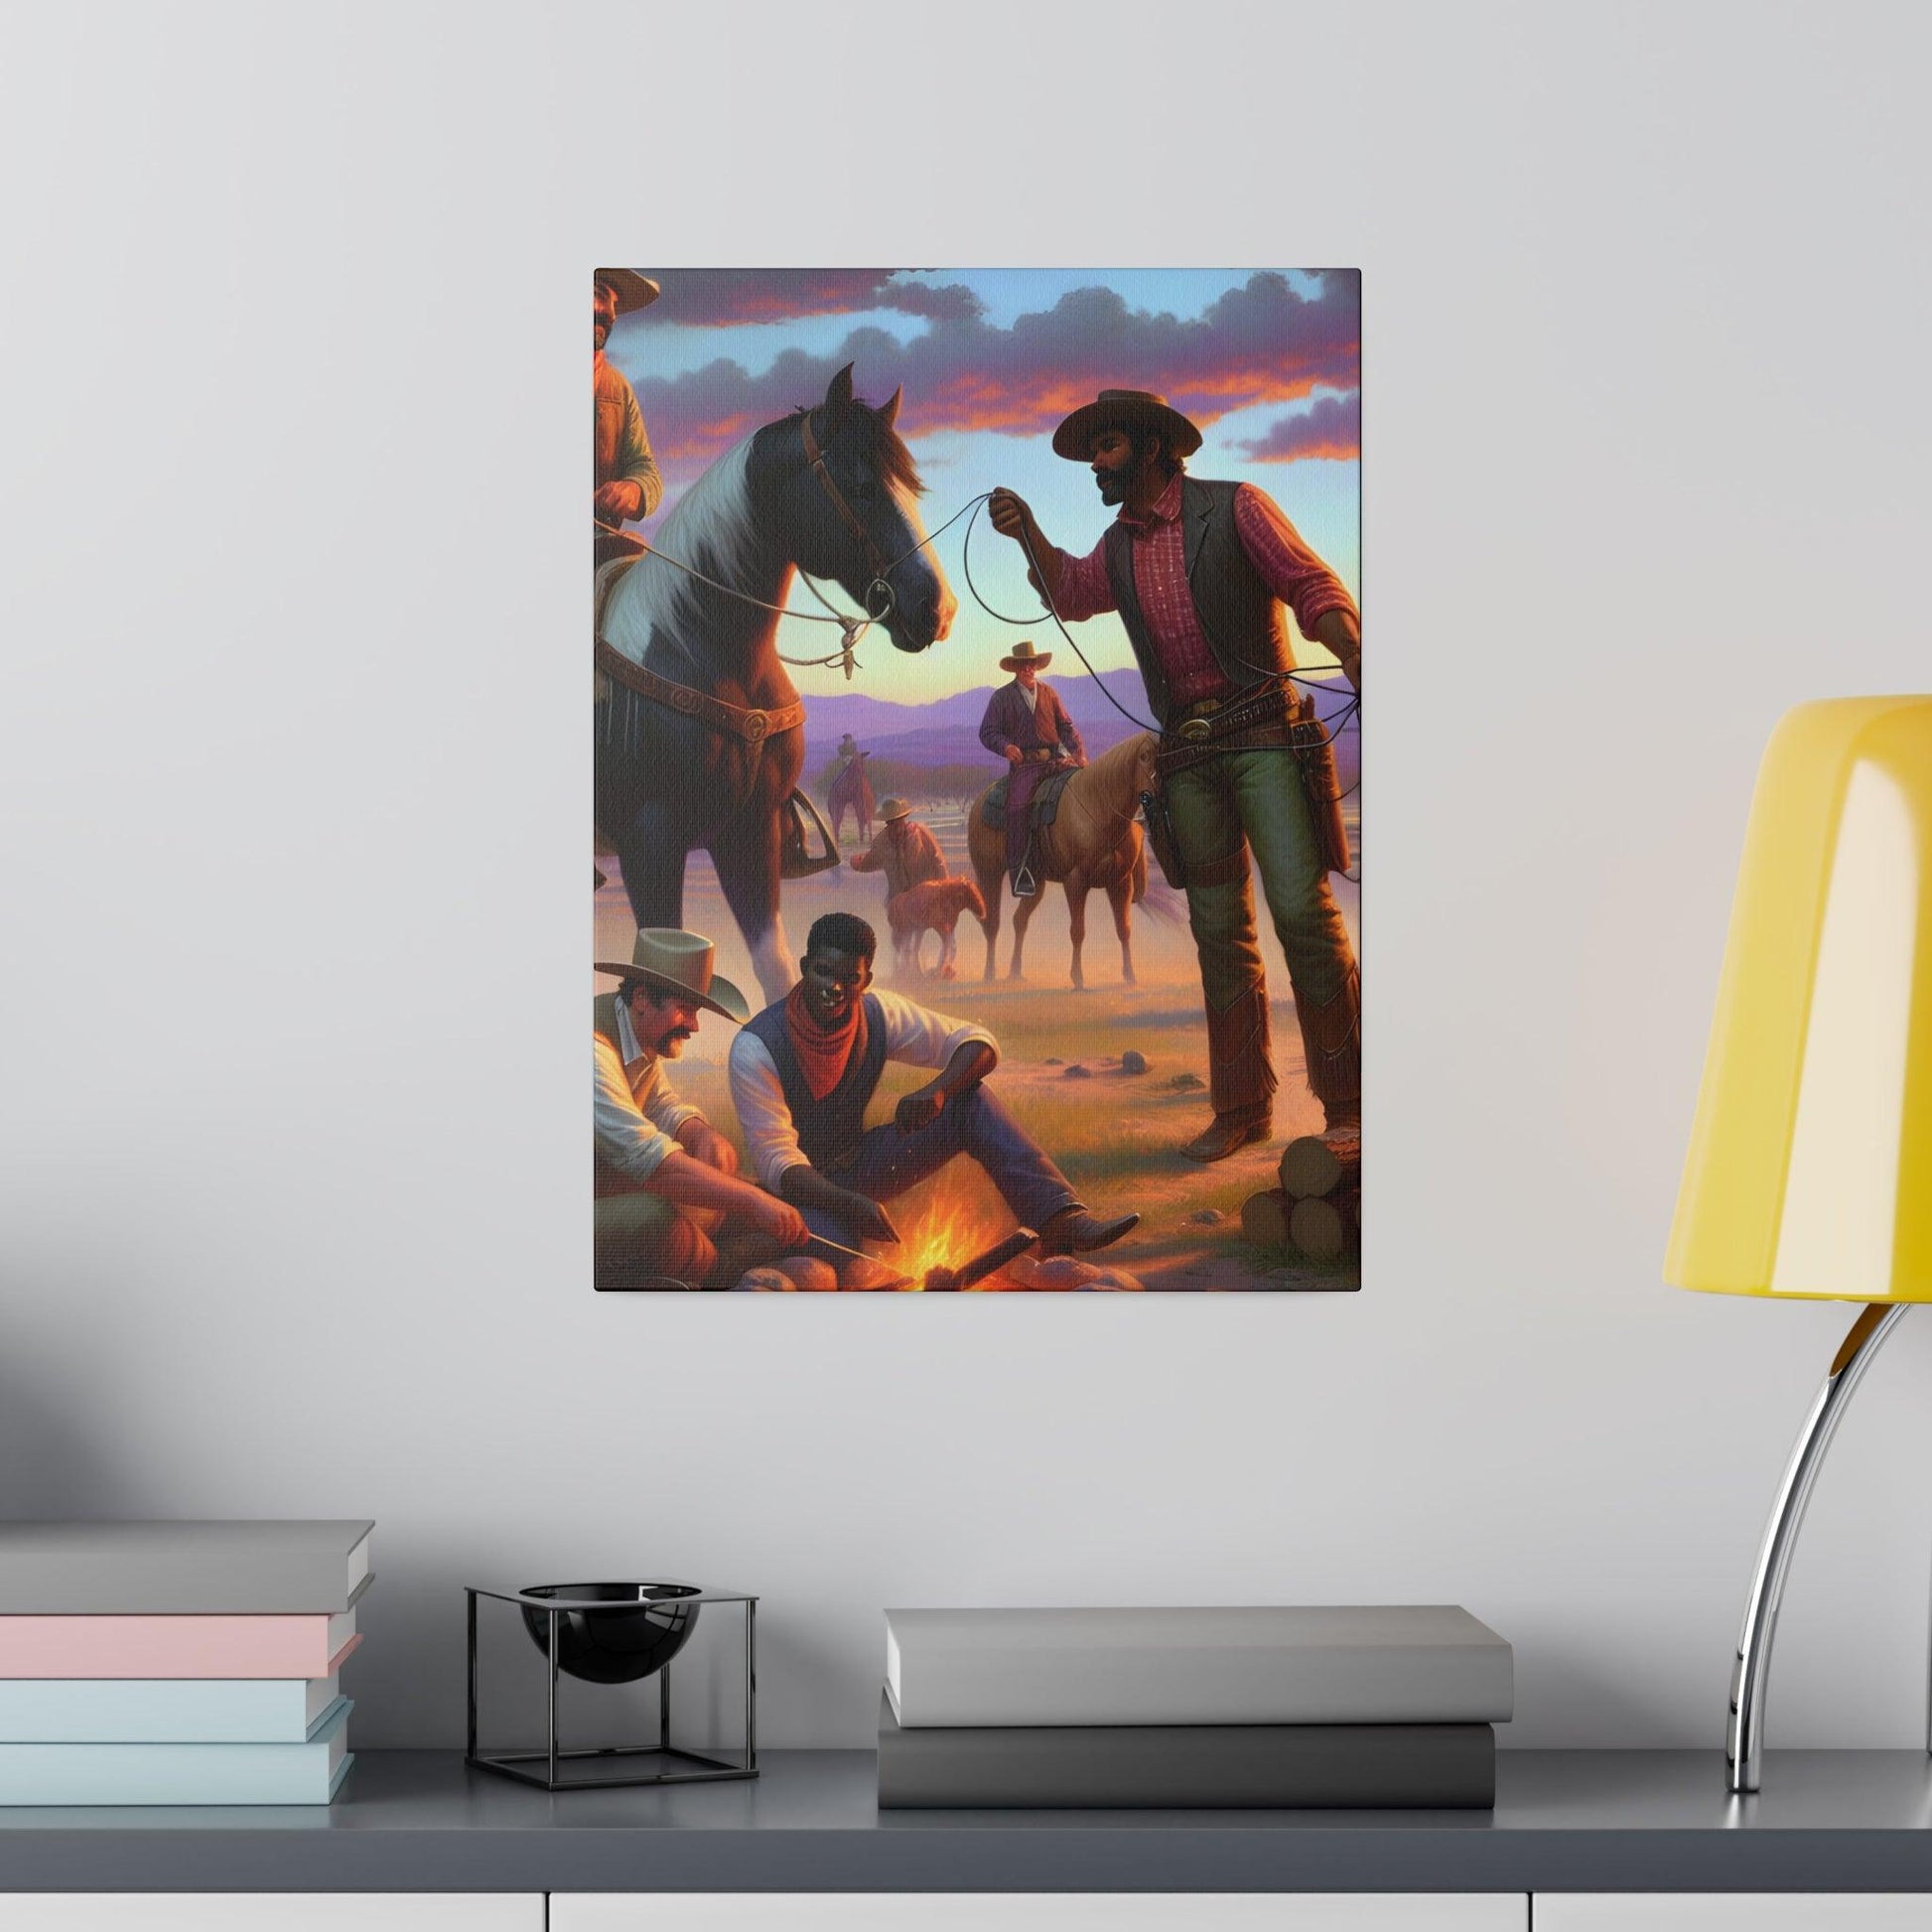 "Rustic Rodeo: Cowboy-Inspired Canvas Wall Art" - The Alice Gallery